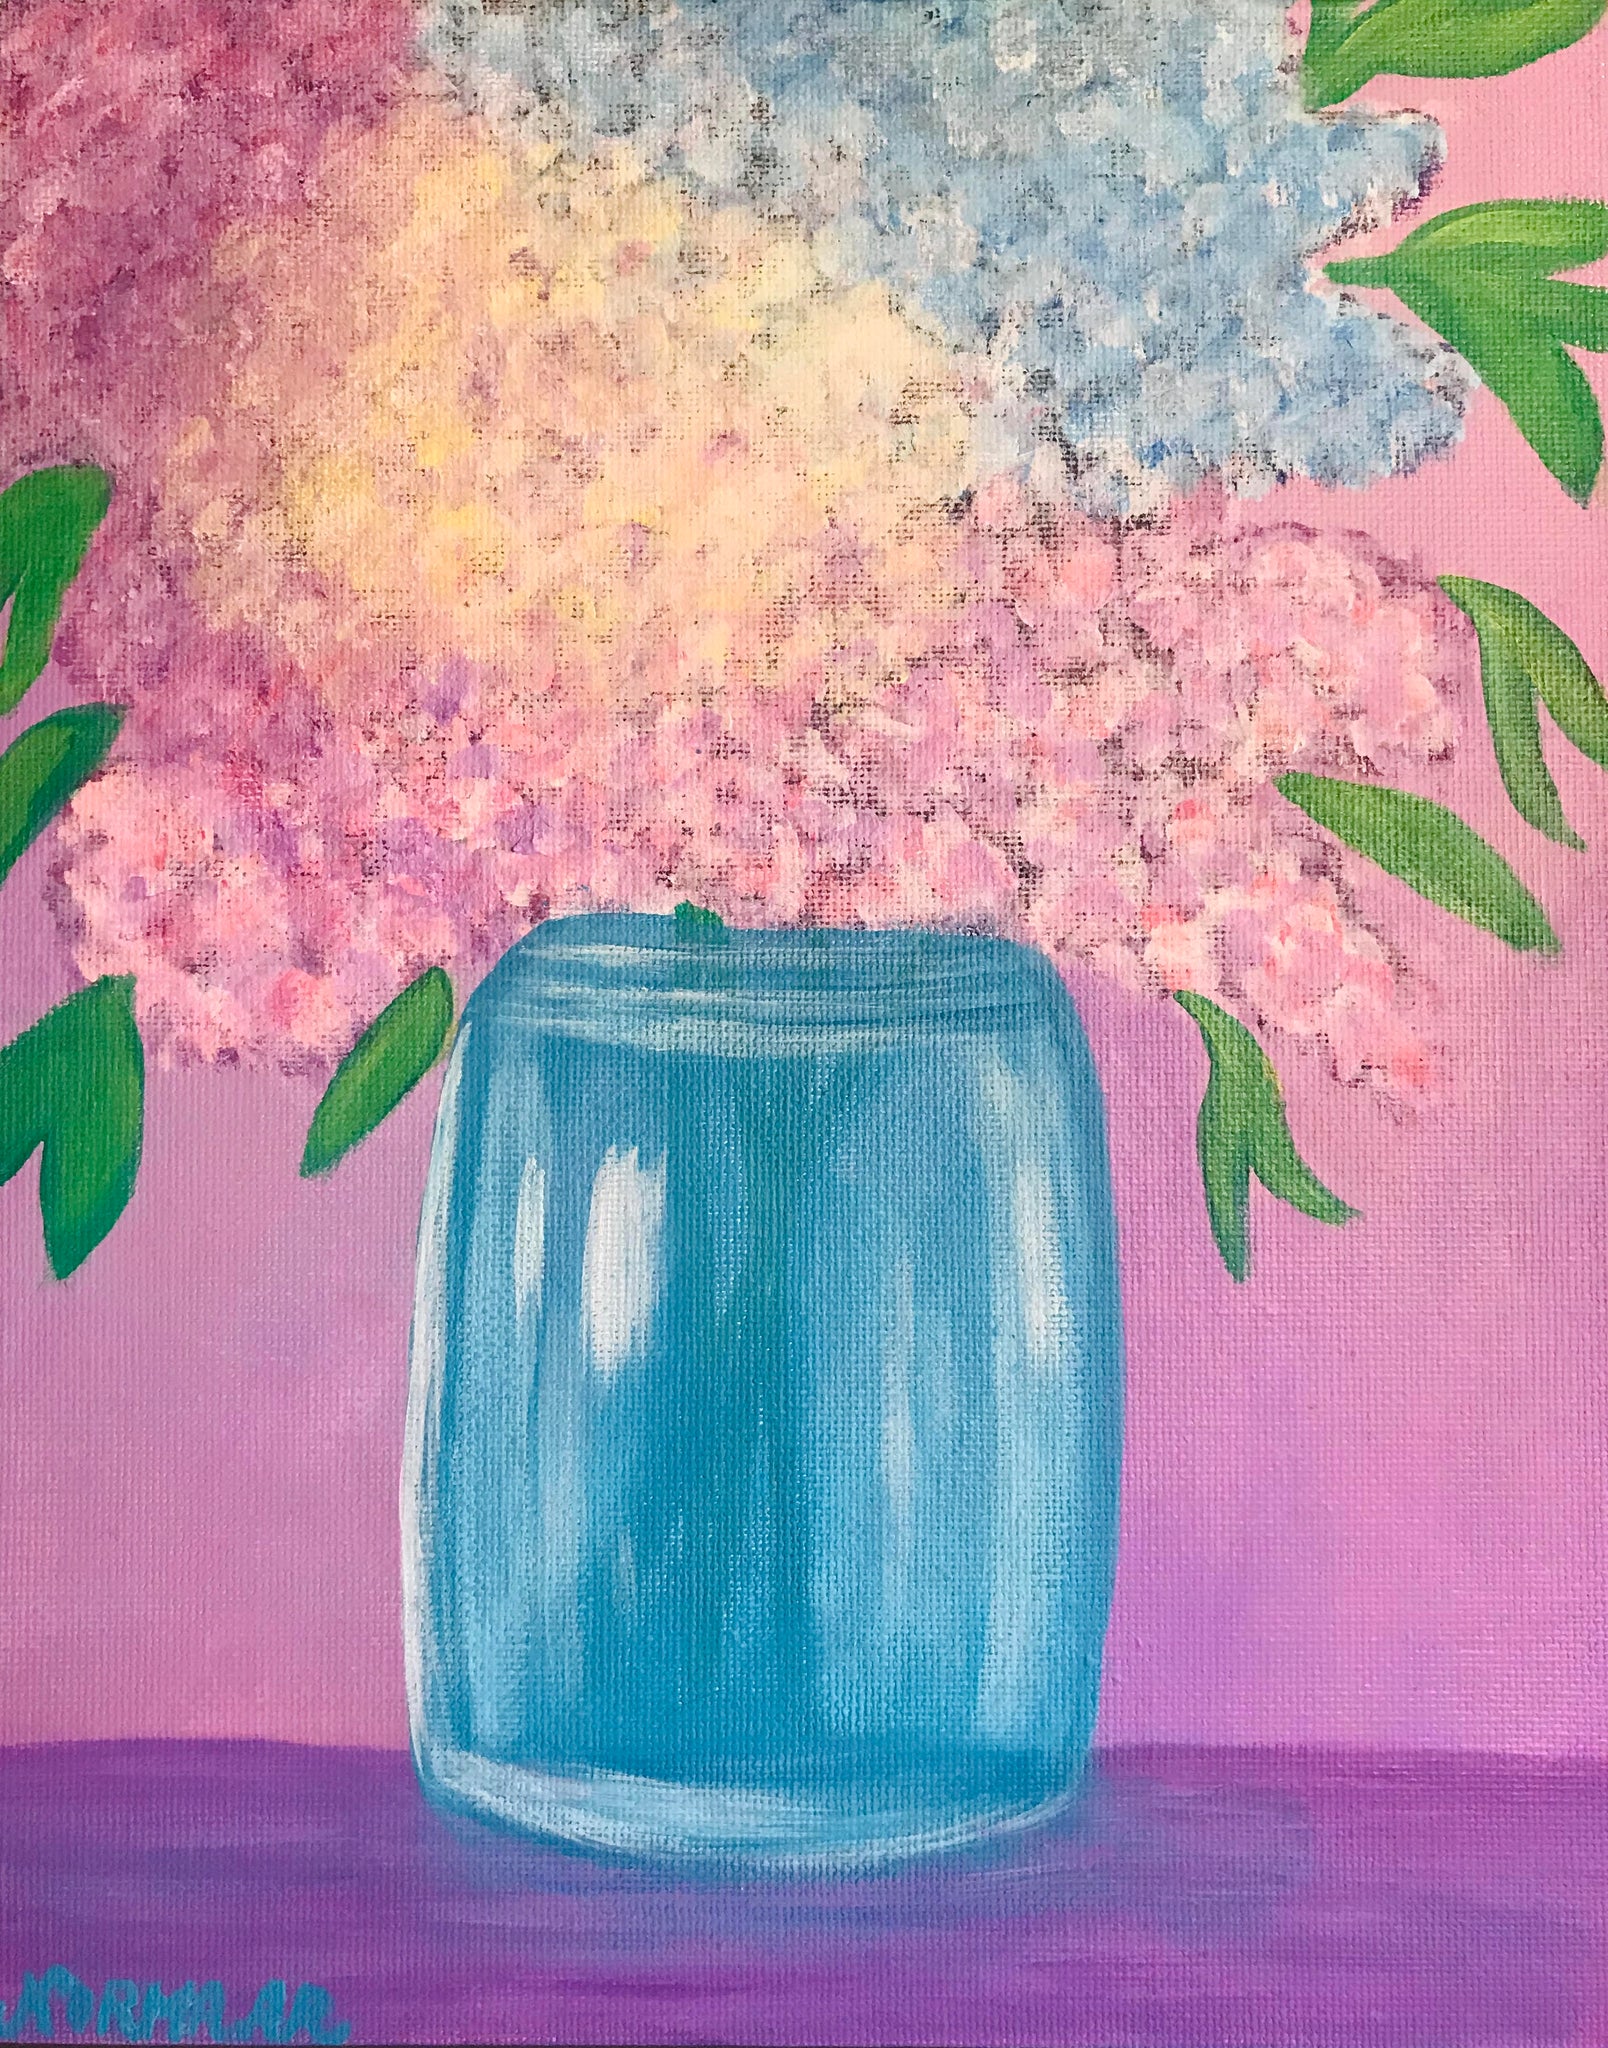 Lilacs in a Mason Jar | Original Art Acrylic Painting, 8x10 inch canvas by Norma Abou-Rizk